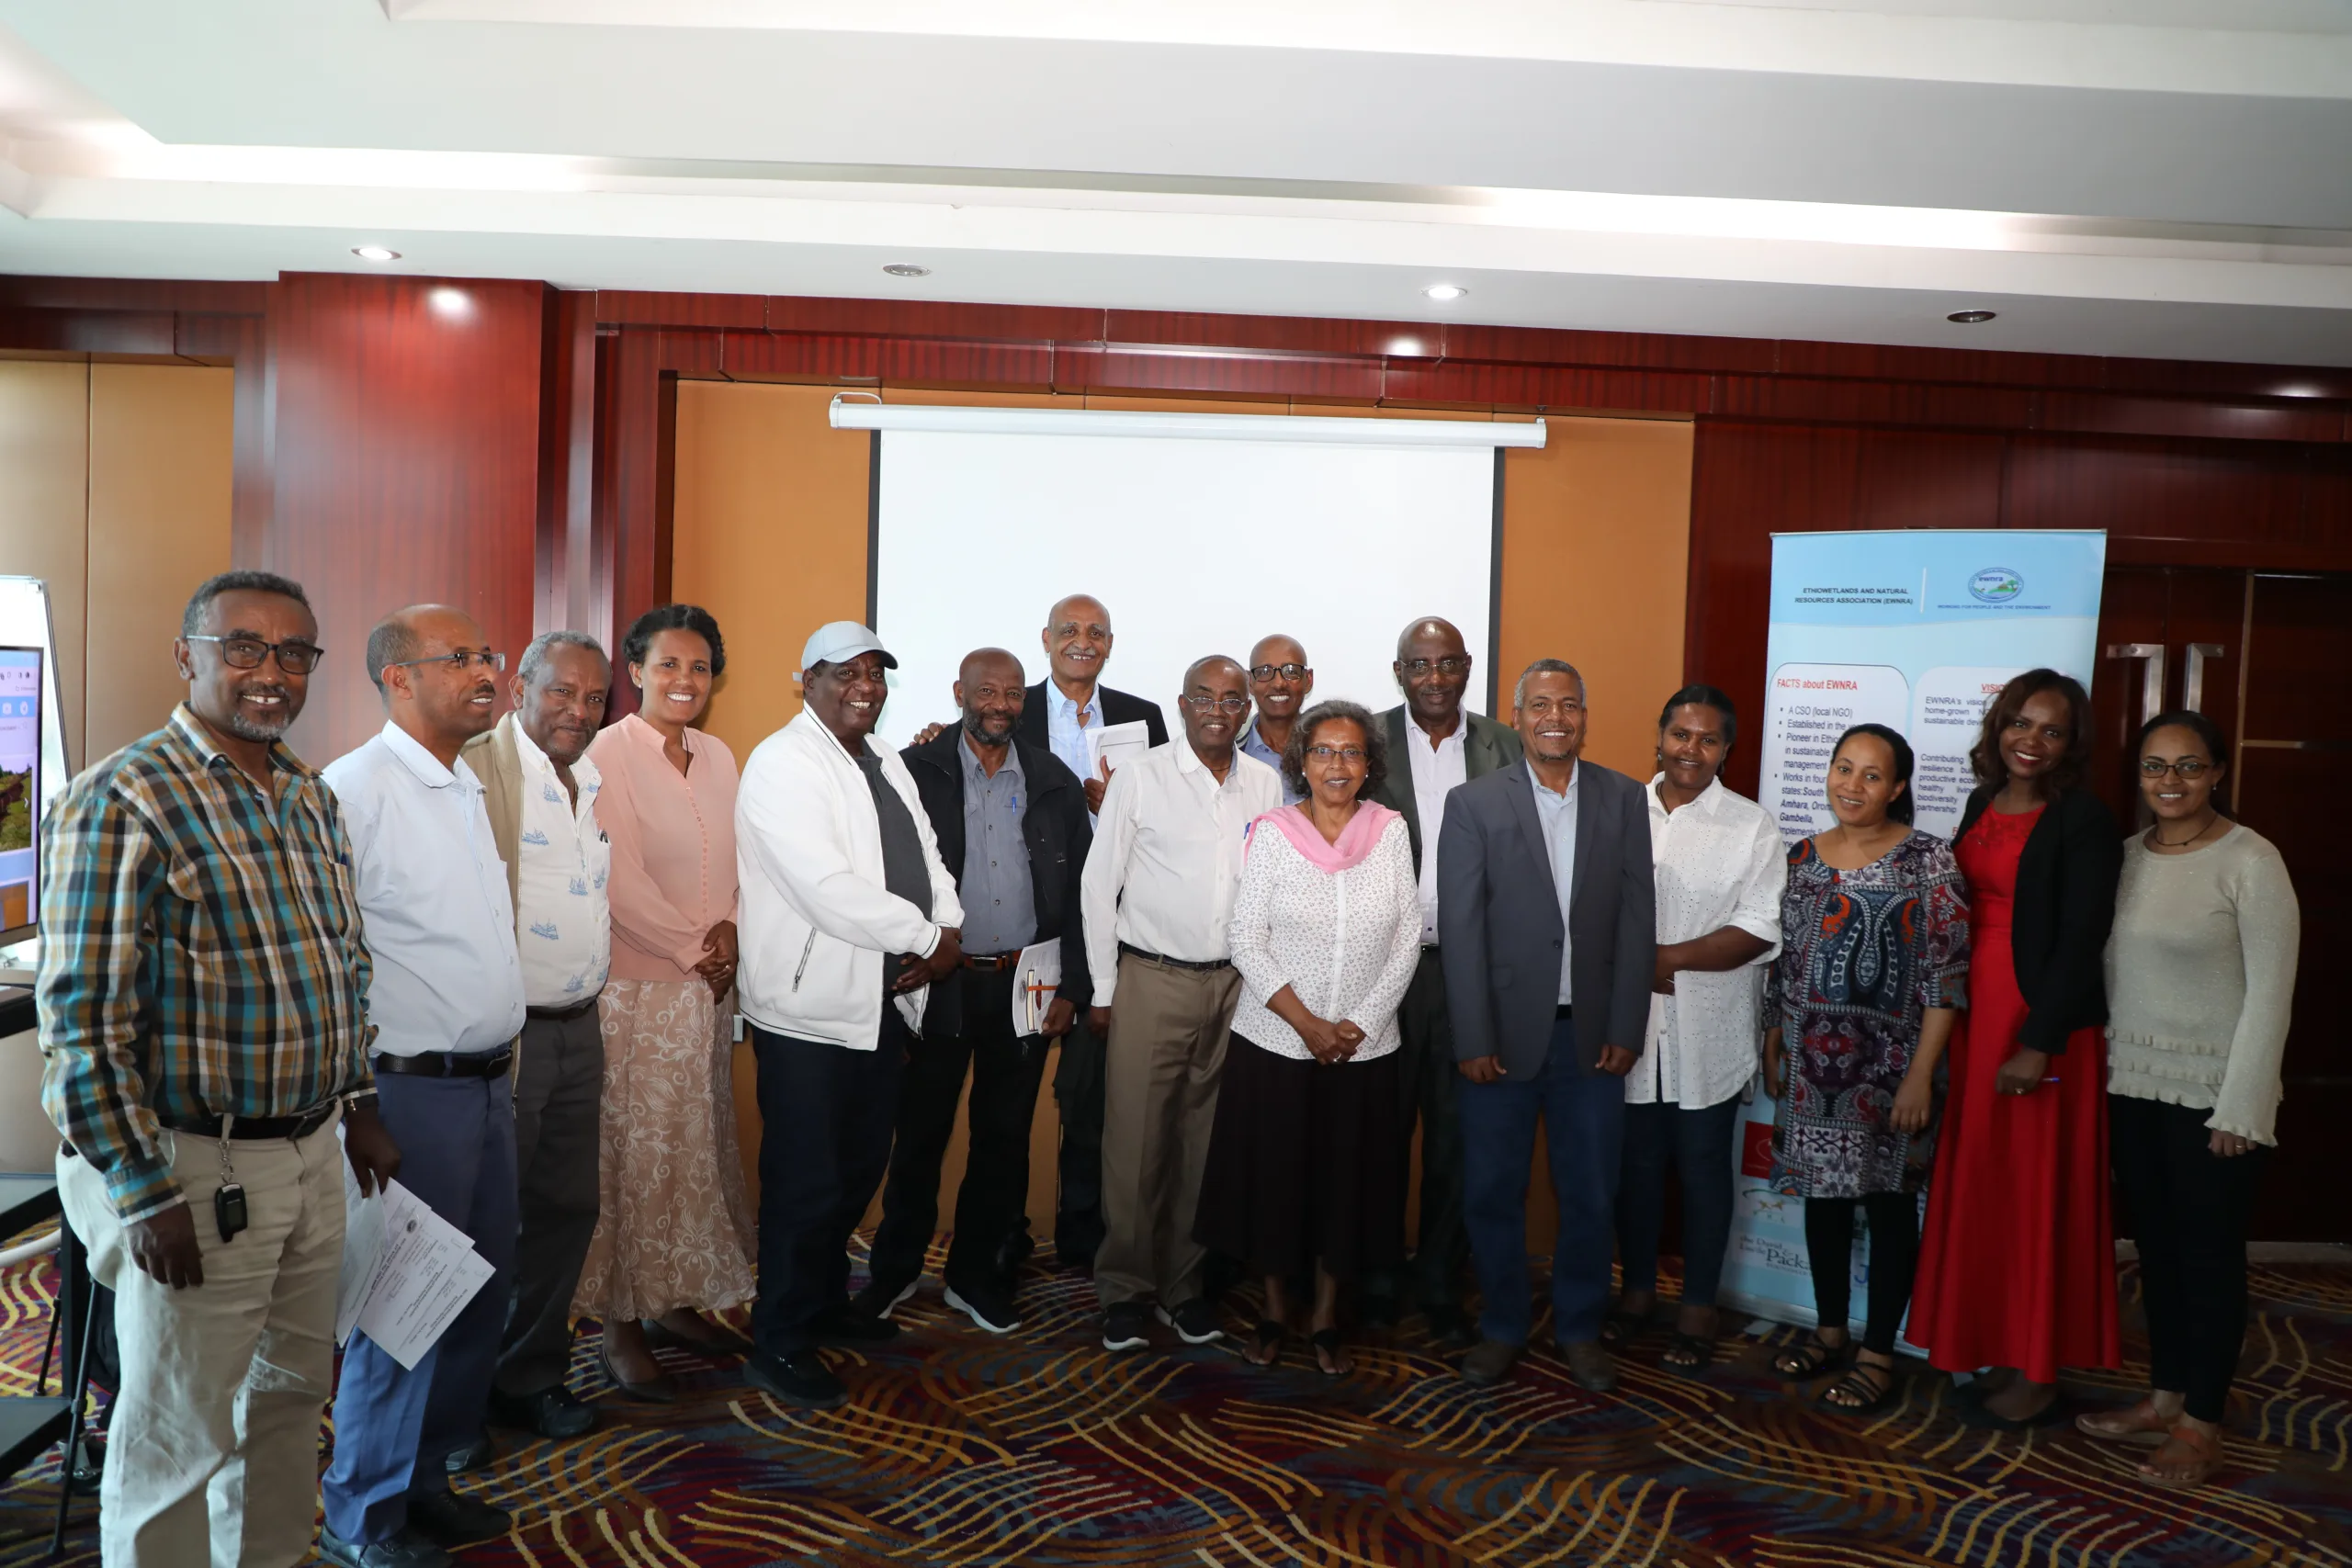 You are currently viewing The general assembly of Ethio Wetlands and Natural Resources Association – EWNRA conducted its annual meeting today at Inter Luxury Hotel, Addis Ababa.